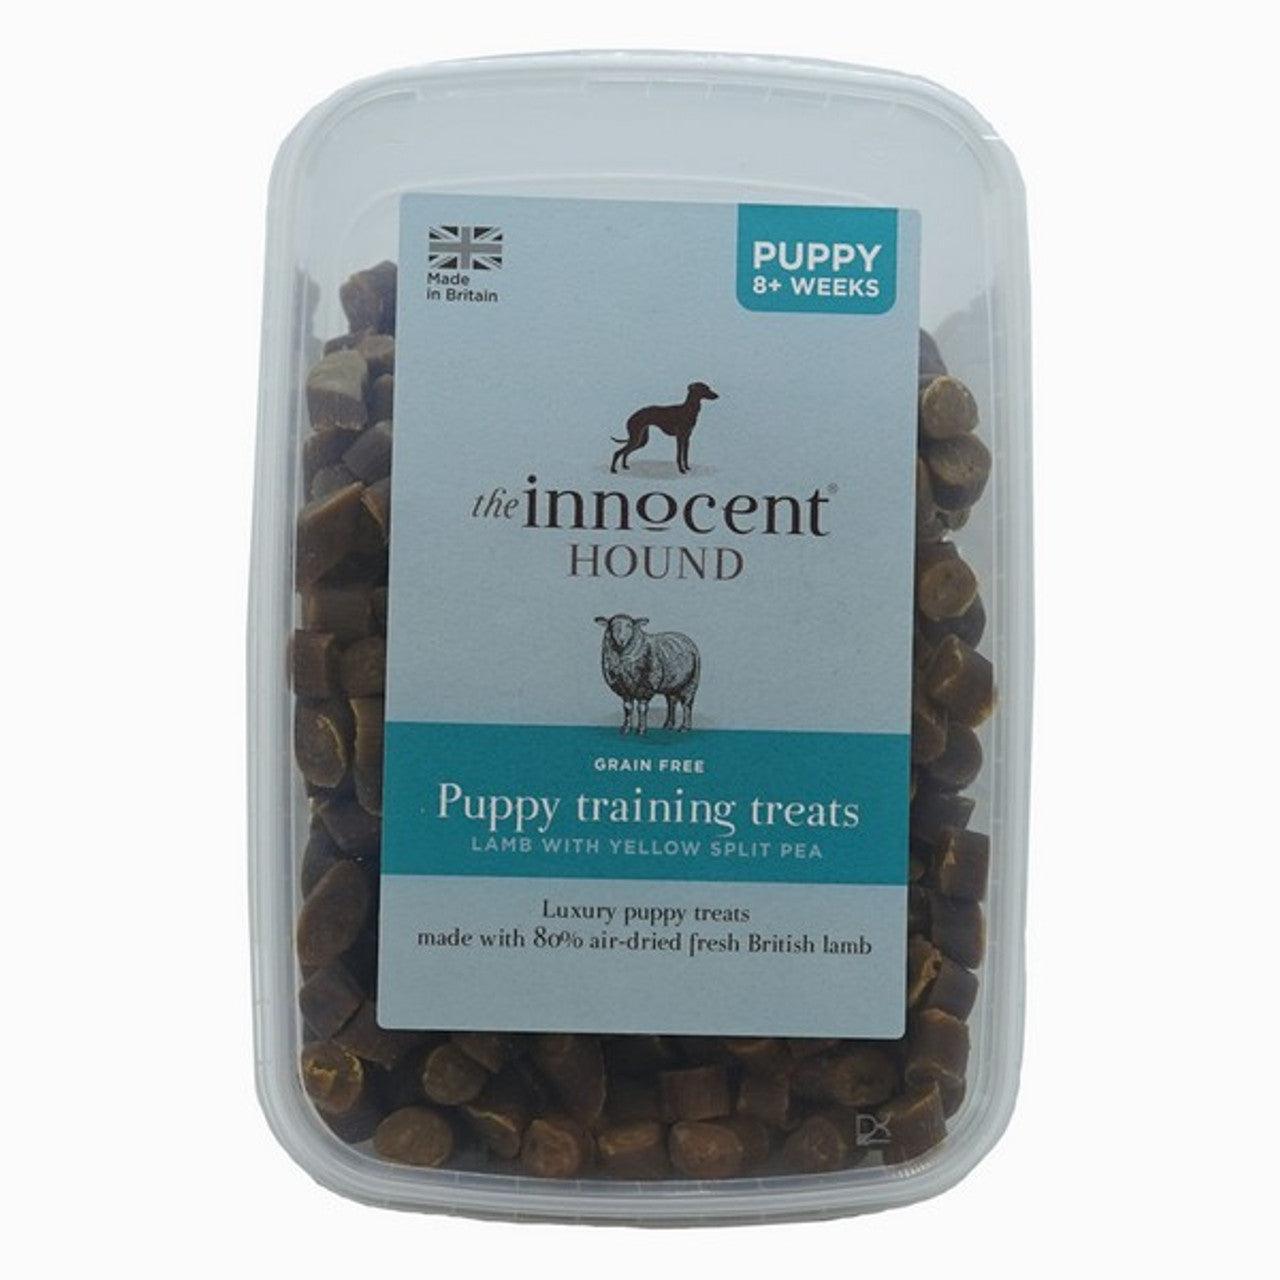 The Innocent Hound Puppy Training Treats Lamb with Yellow Split Pea 3 x 600g - North East Pet Shop The Innocent